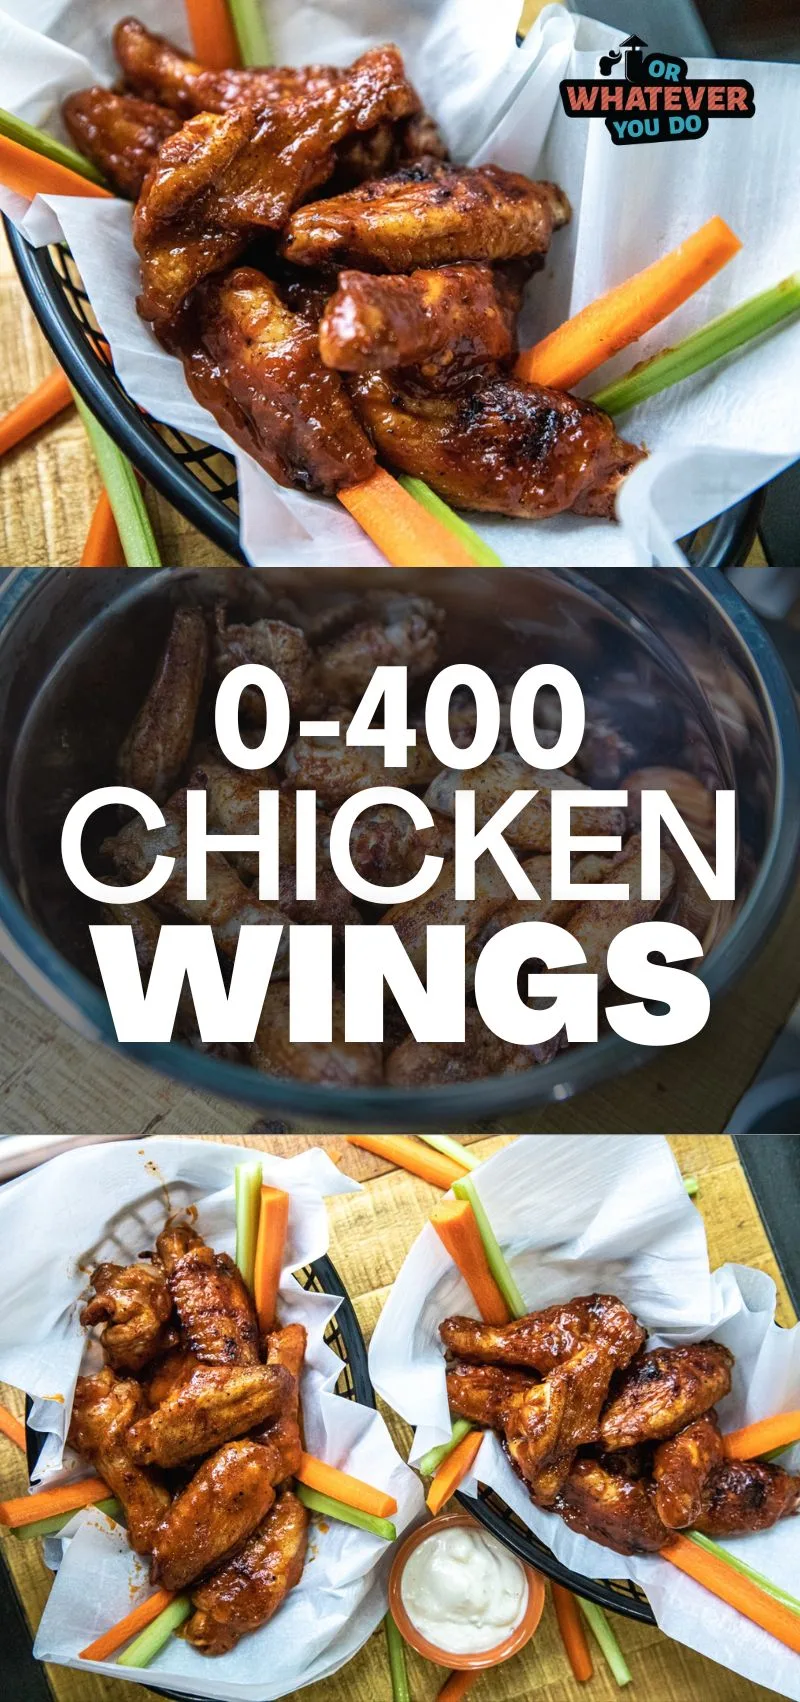 0-400 Chicken Wings - Or Whatever You Do